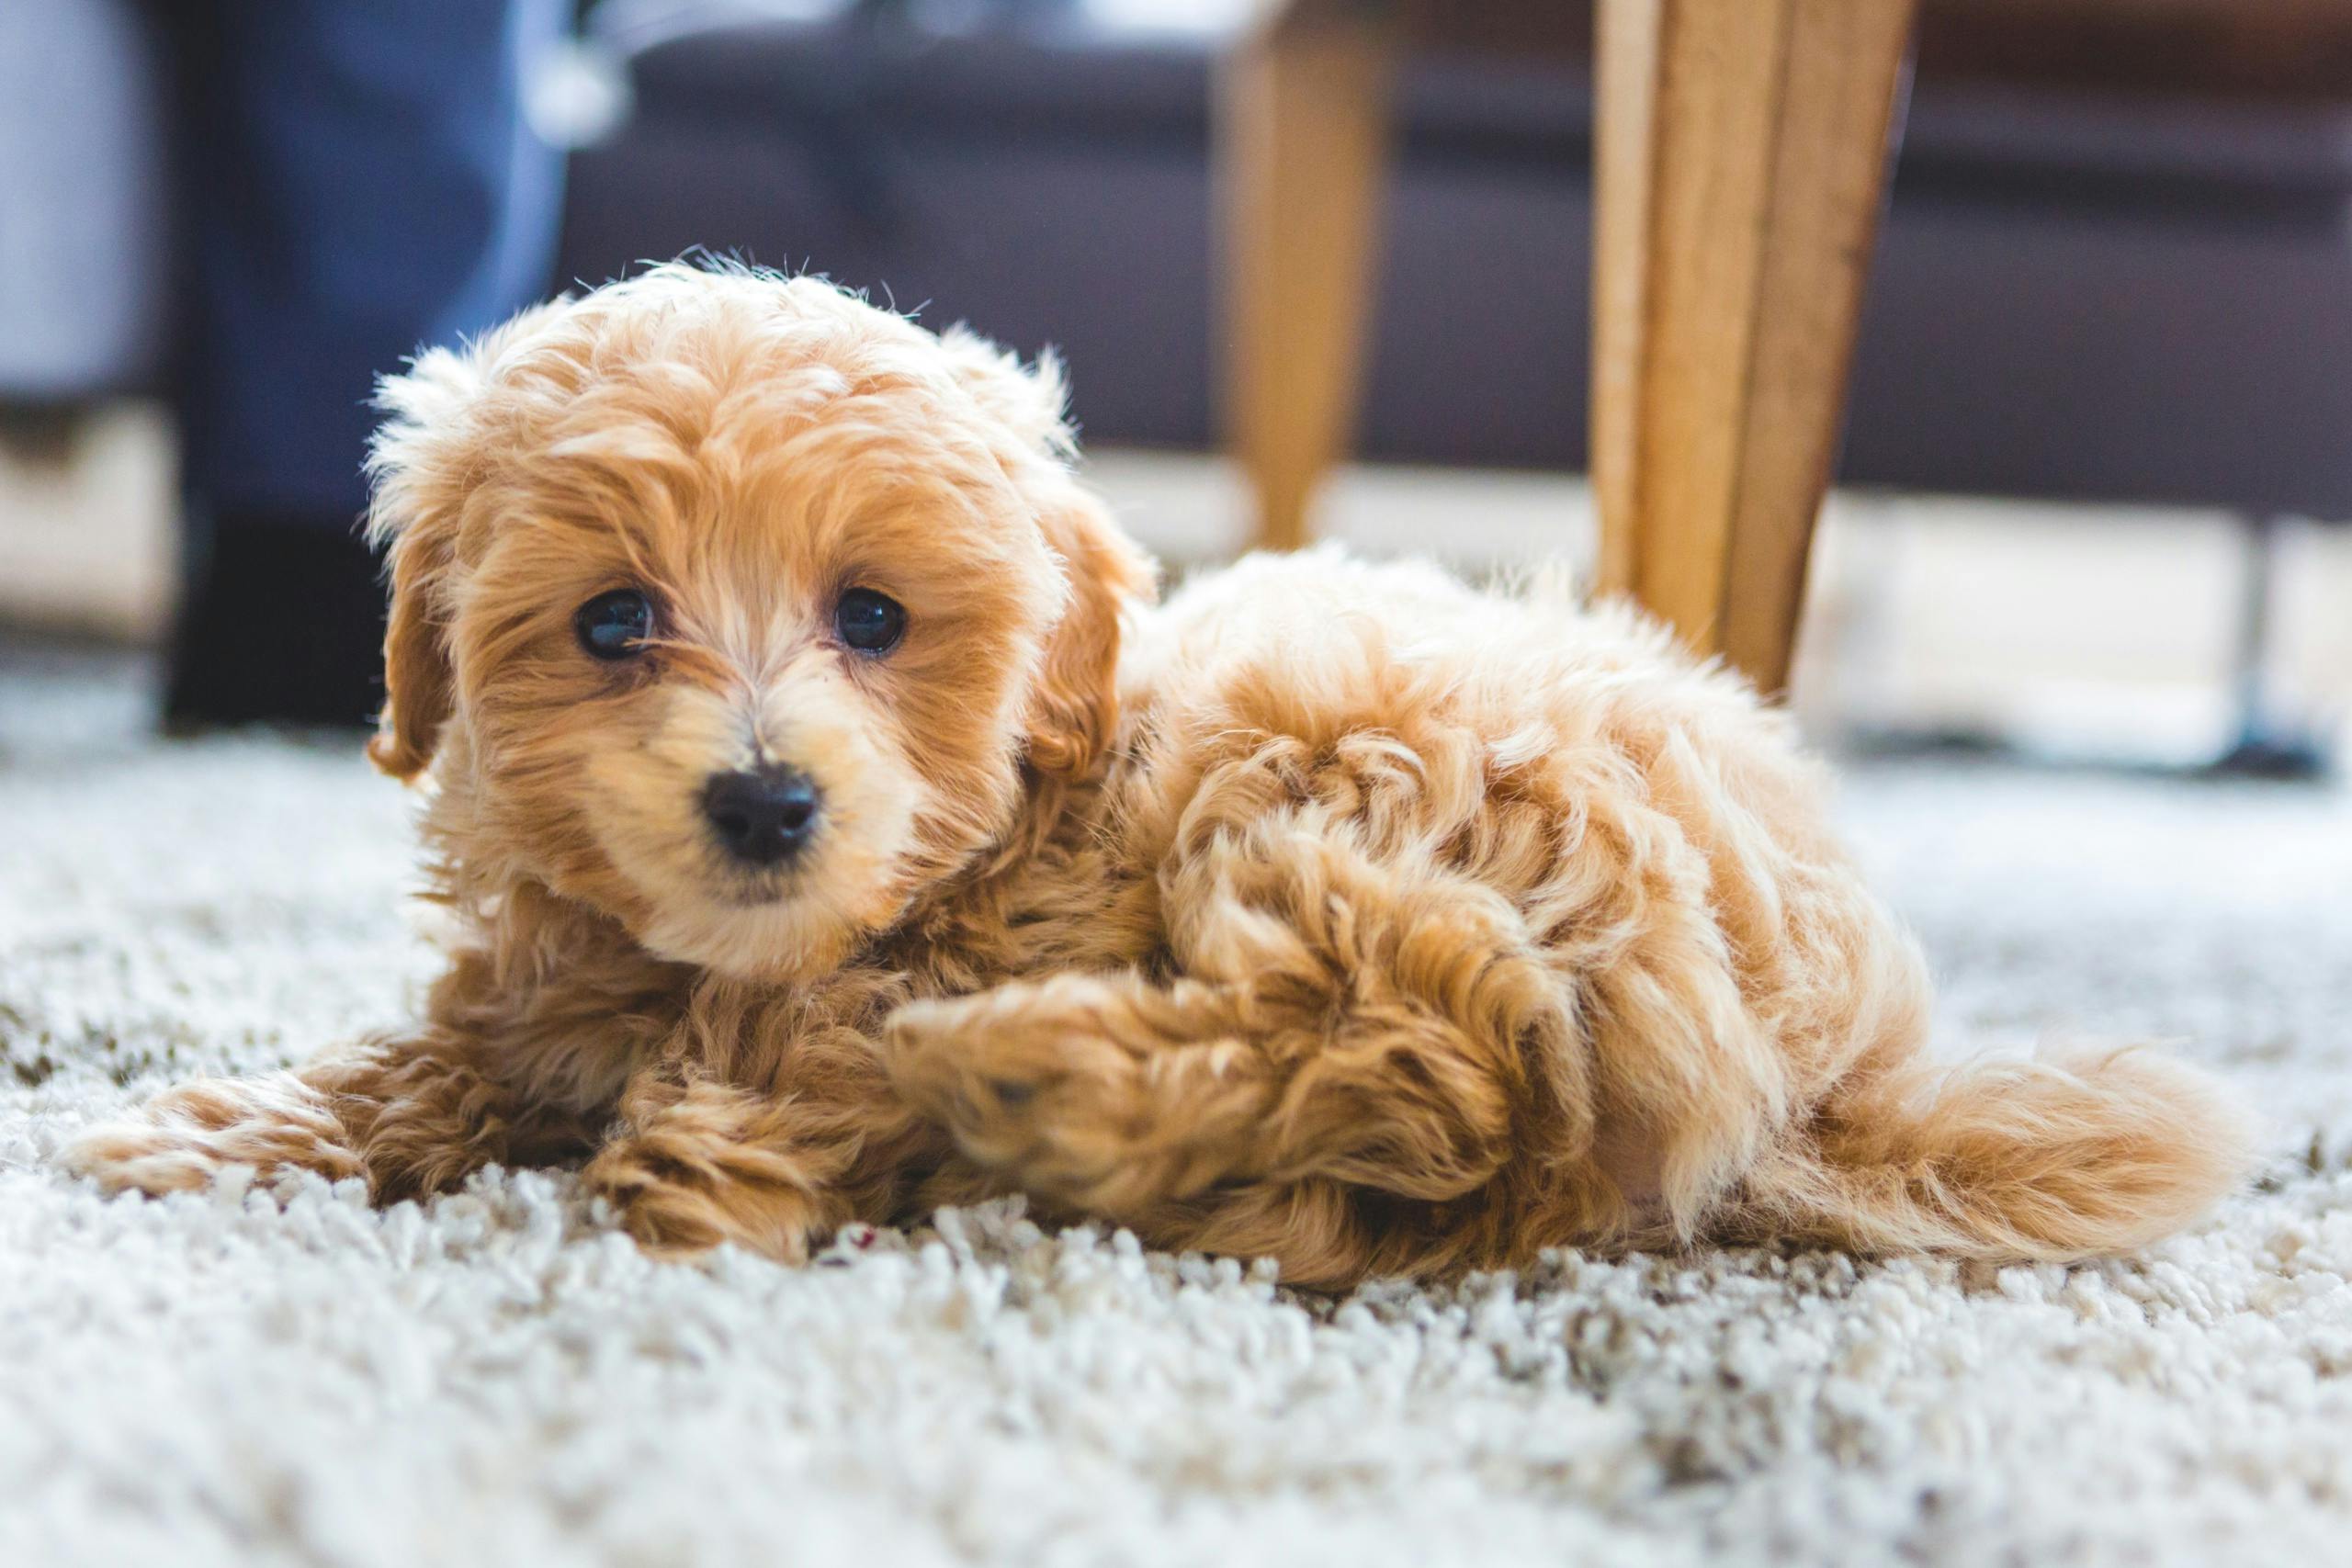 How to Puppy Proof Your Home